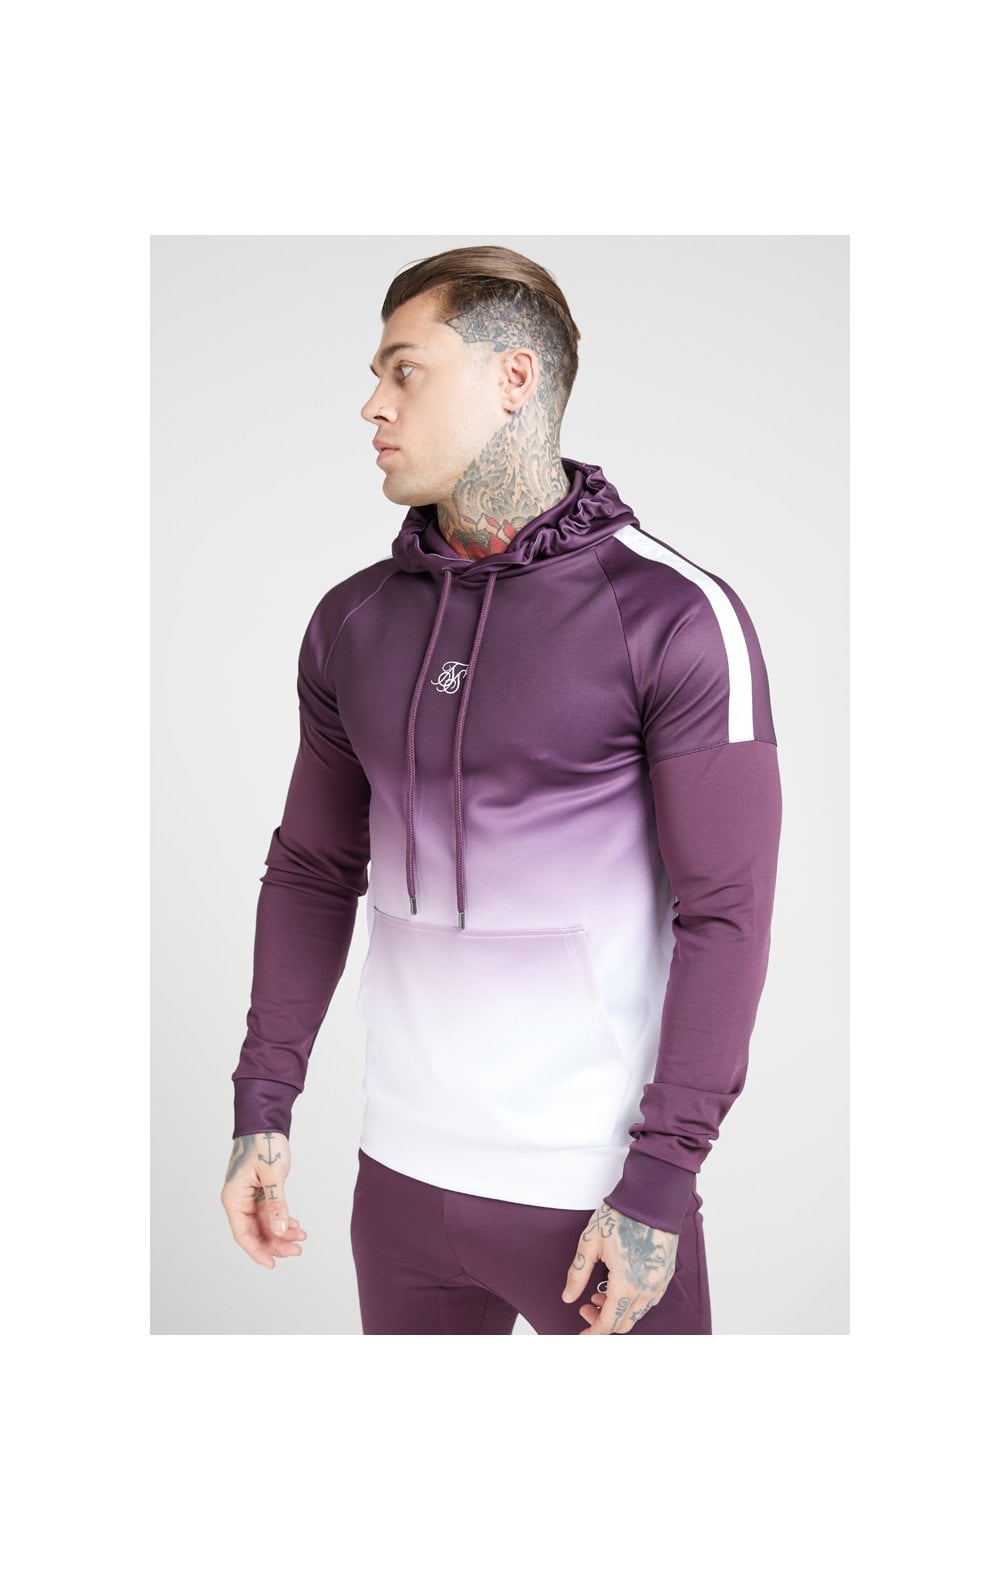 Load image into Gallery viewer, SikSilk Vapour Hybrid Sleeve Tape Hoodie - Rich Burgundy Fade (1)